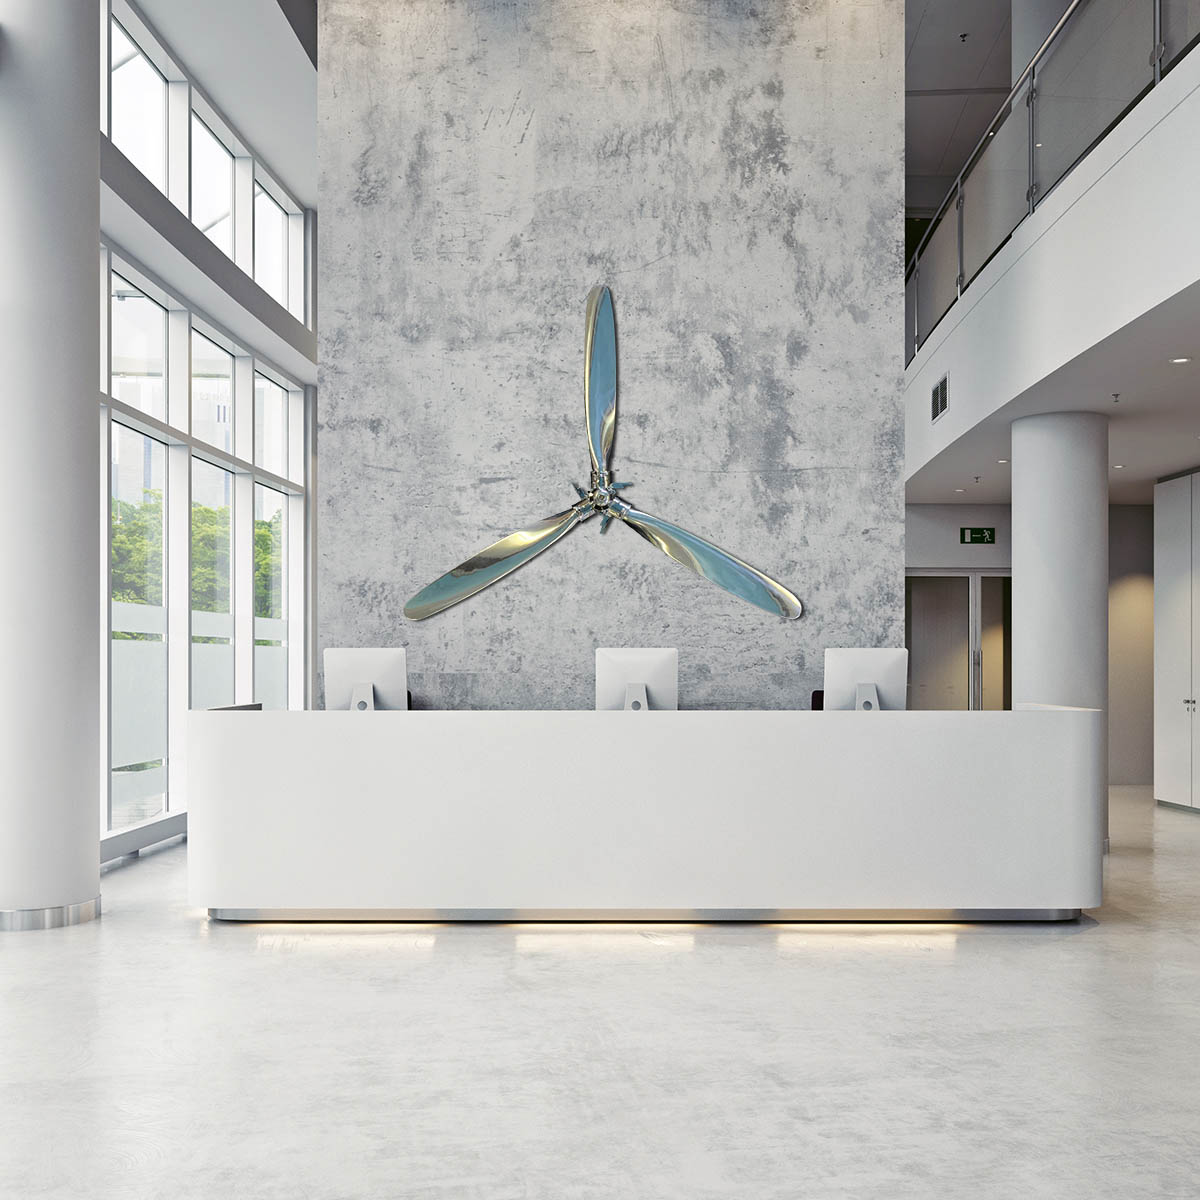 Polished Hartzell propellers and hub displayed in the reception area of an office.